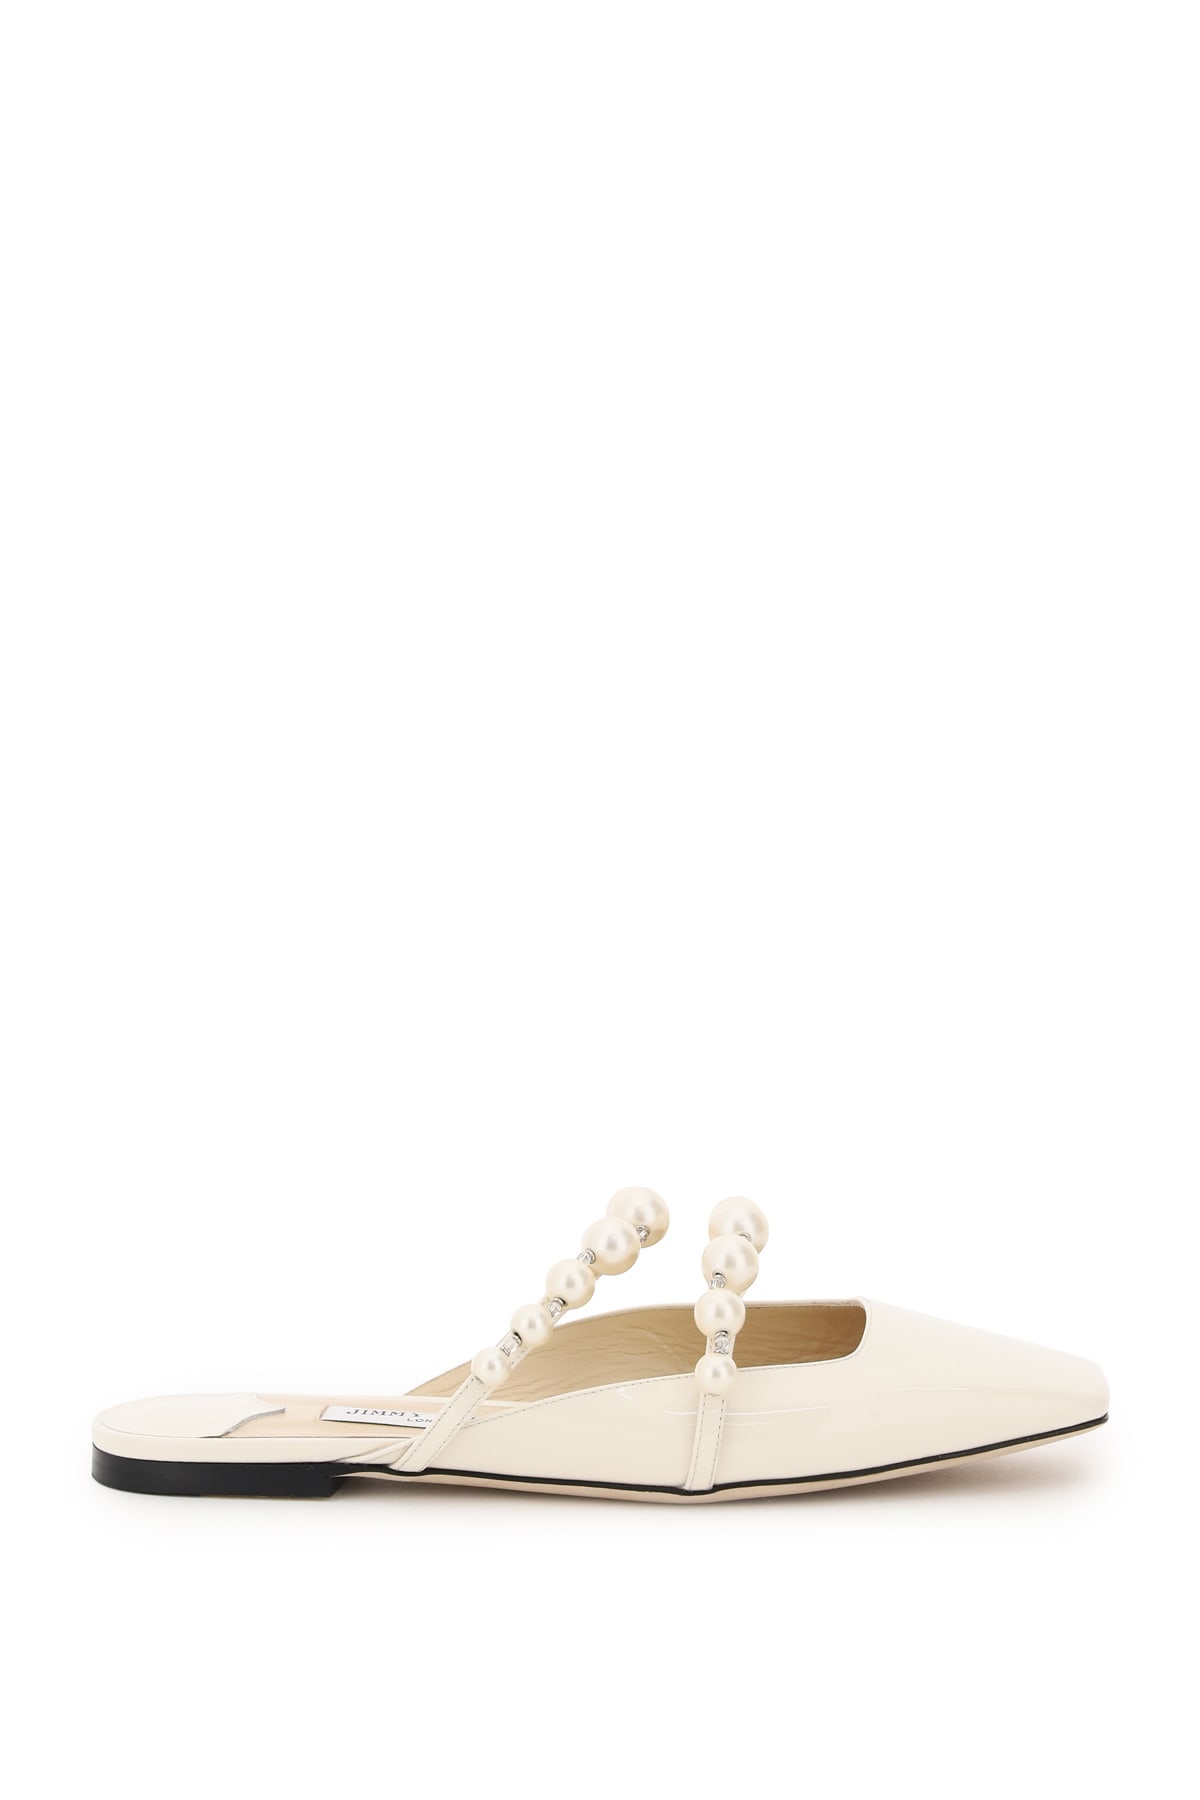 Buy Jimmy Choo Flat Amaya Patent Ballet Flats With Pearls online, shop Jimmy Choo shoes with free shipping